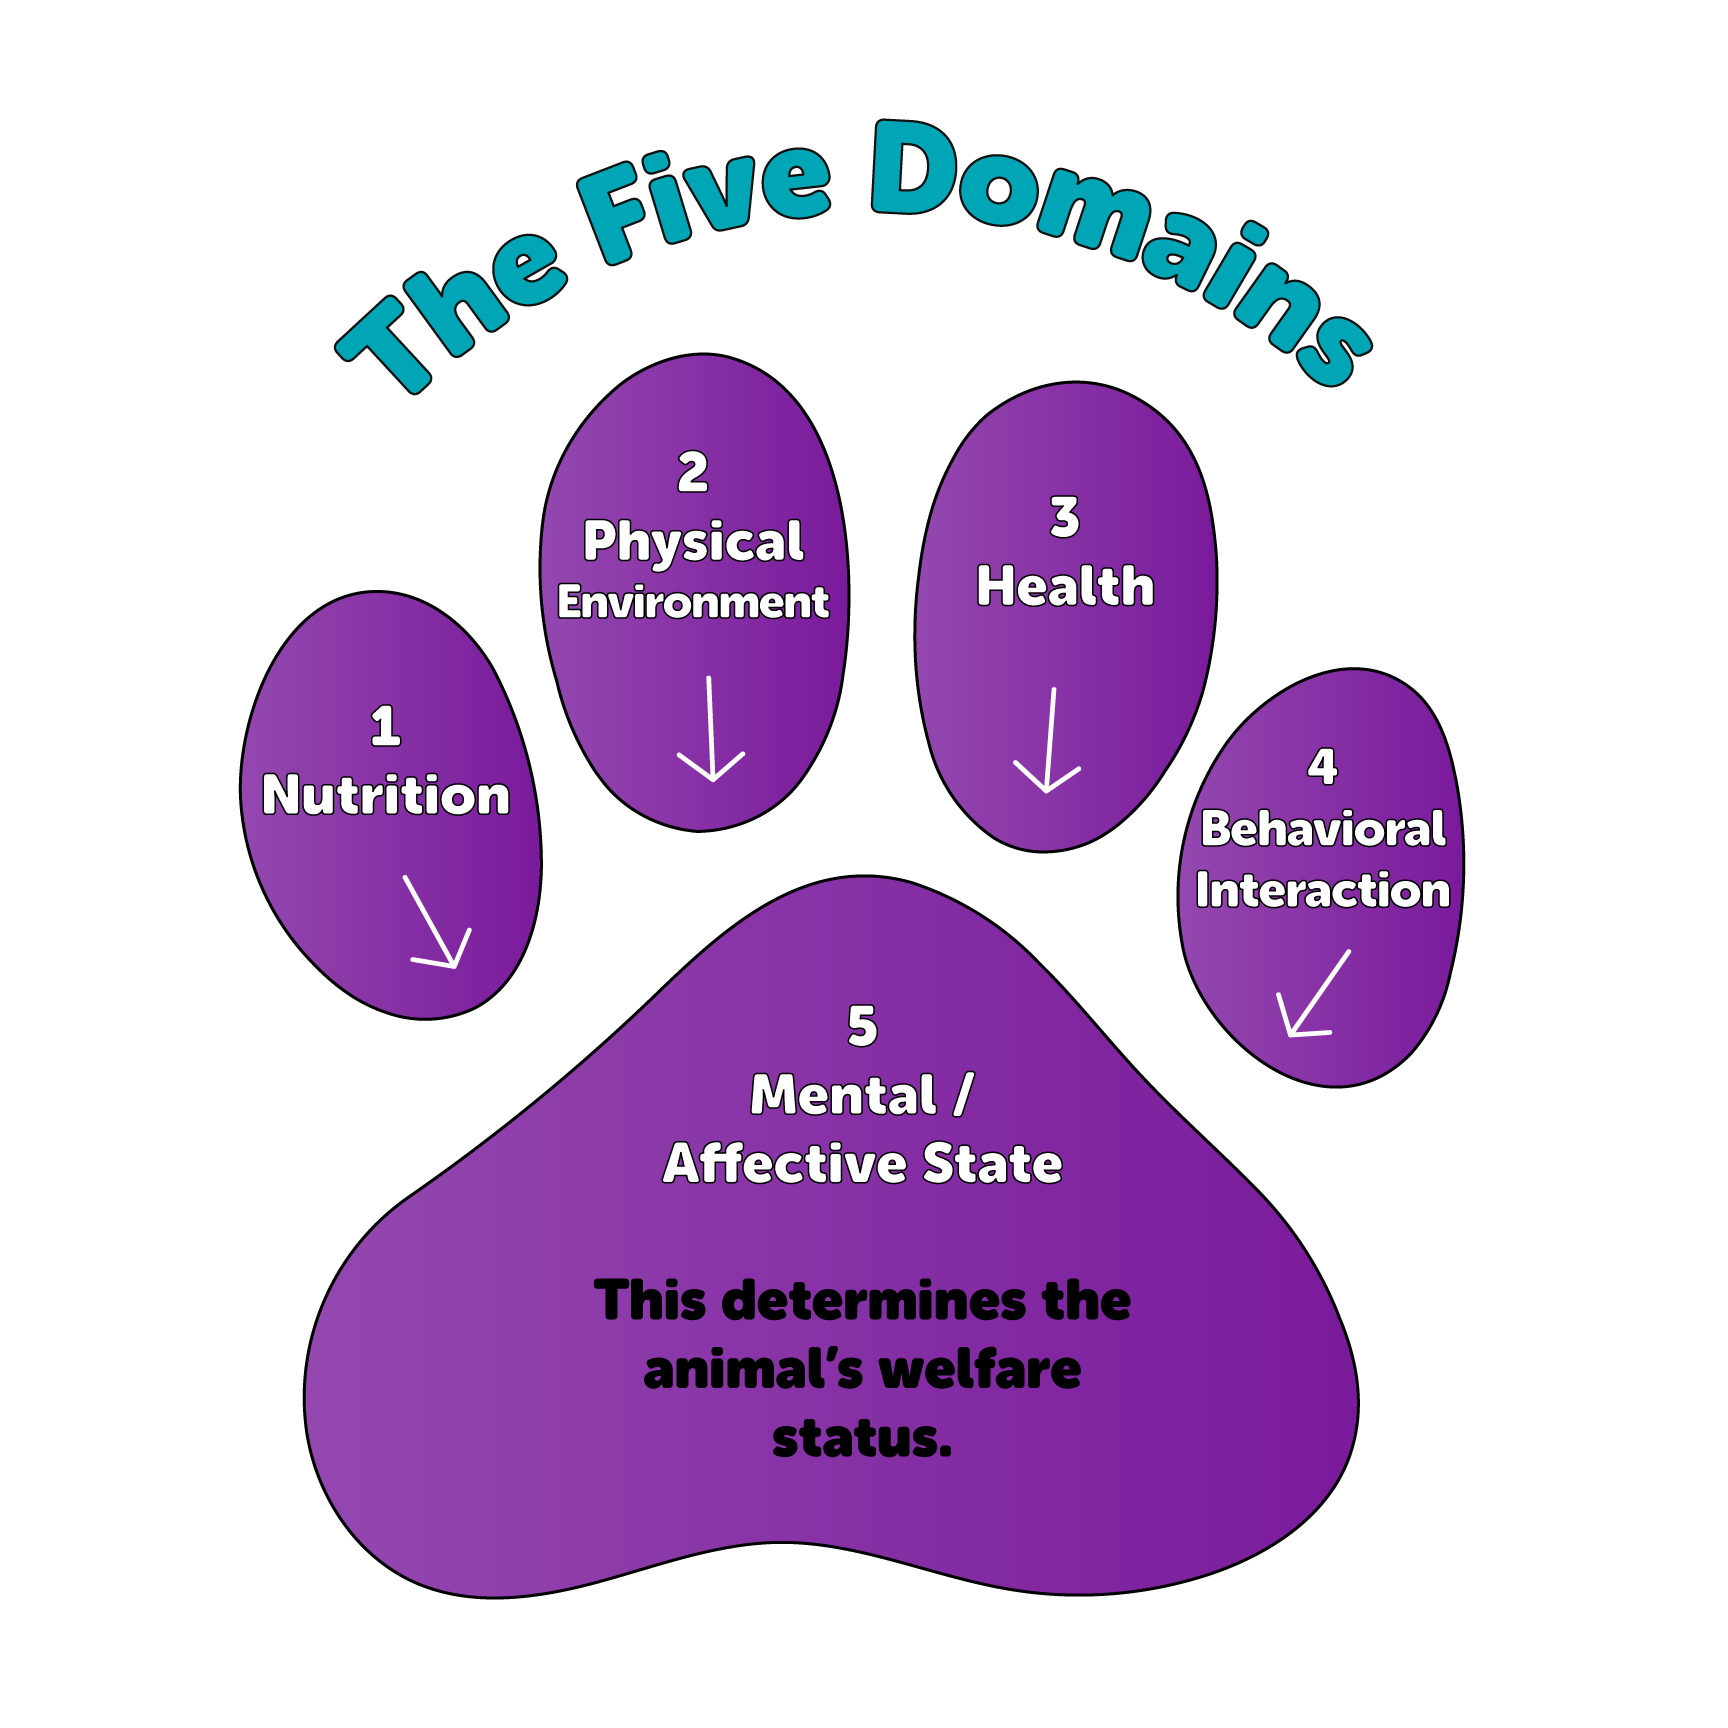 The Five Domains: Animal Welfare and Wellbeing